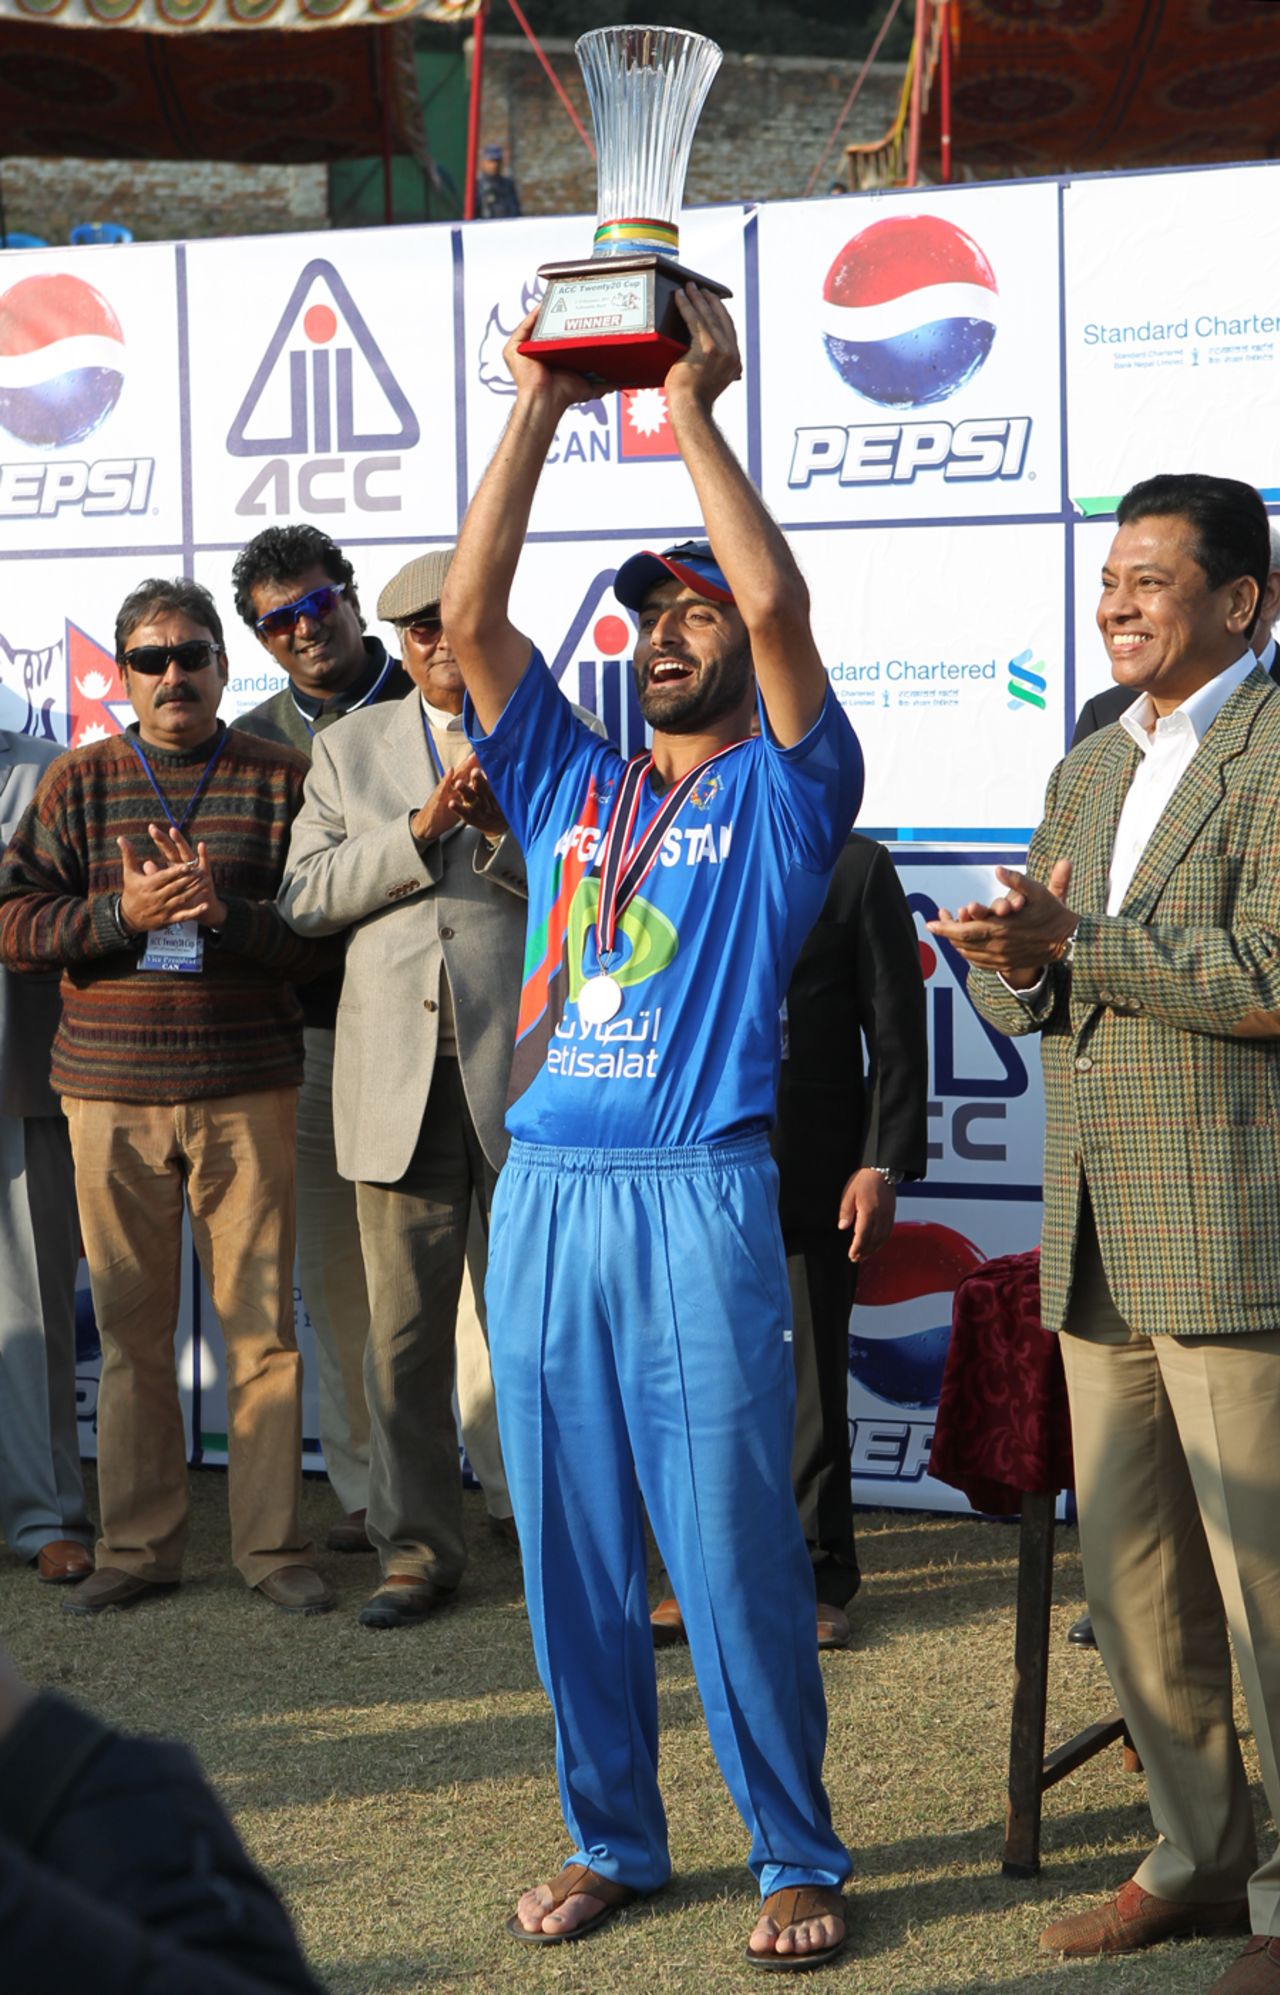 Afghanistan's skipper Nawroz Mangal lifts the ACC Twenty20 Cup 2011 Winners' Trophy after his team beat Hong Kong by 8 runs in the final played in kathmandu on 11th December 2011